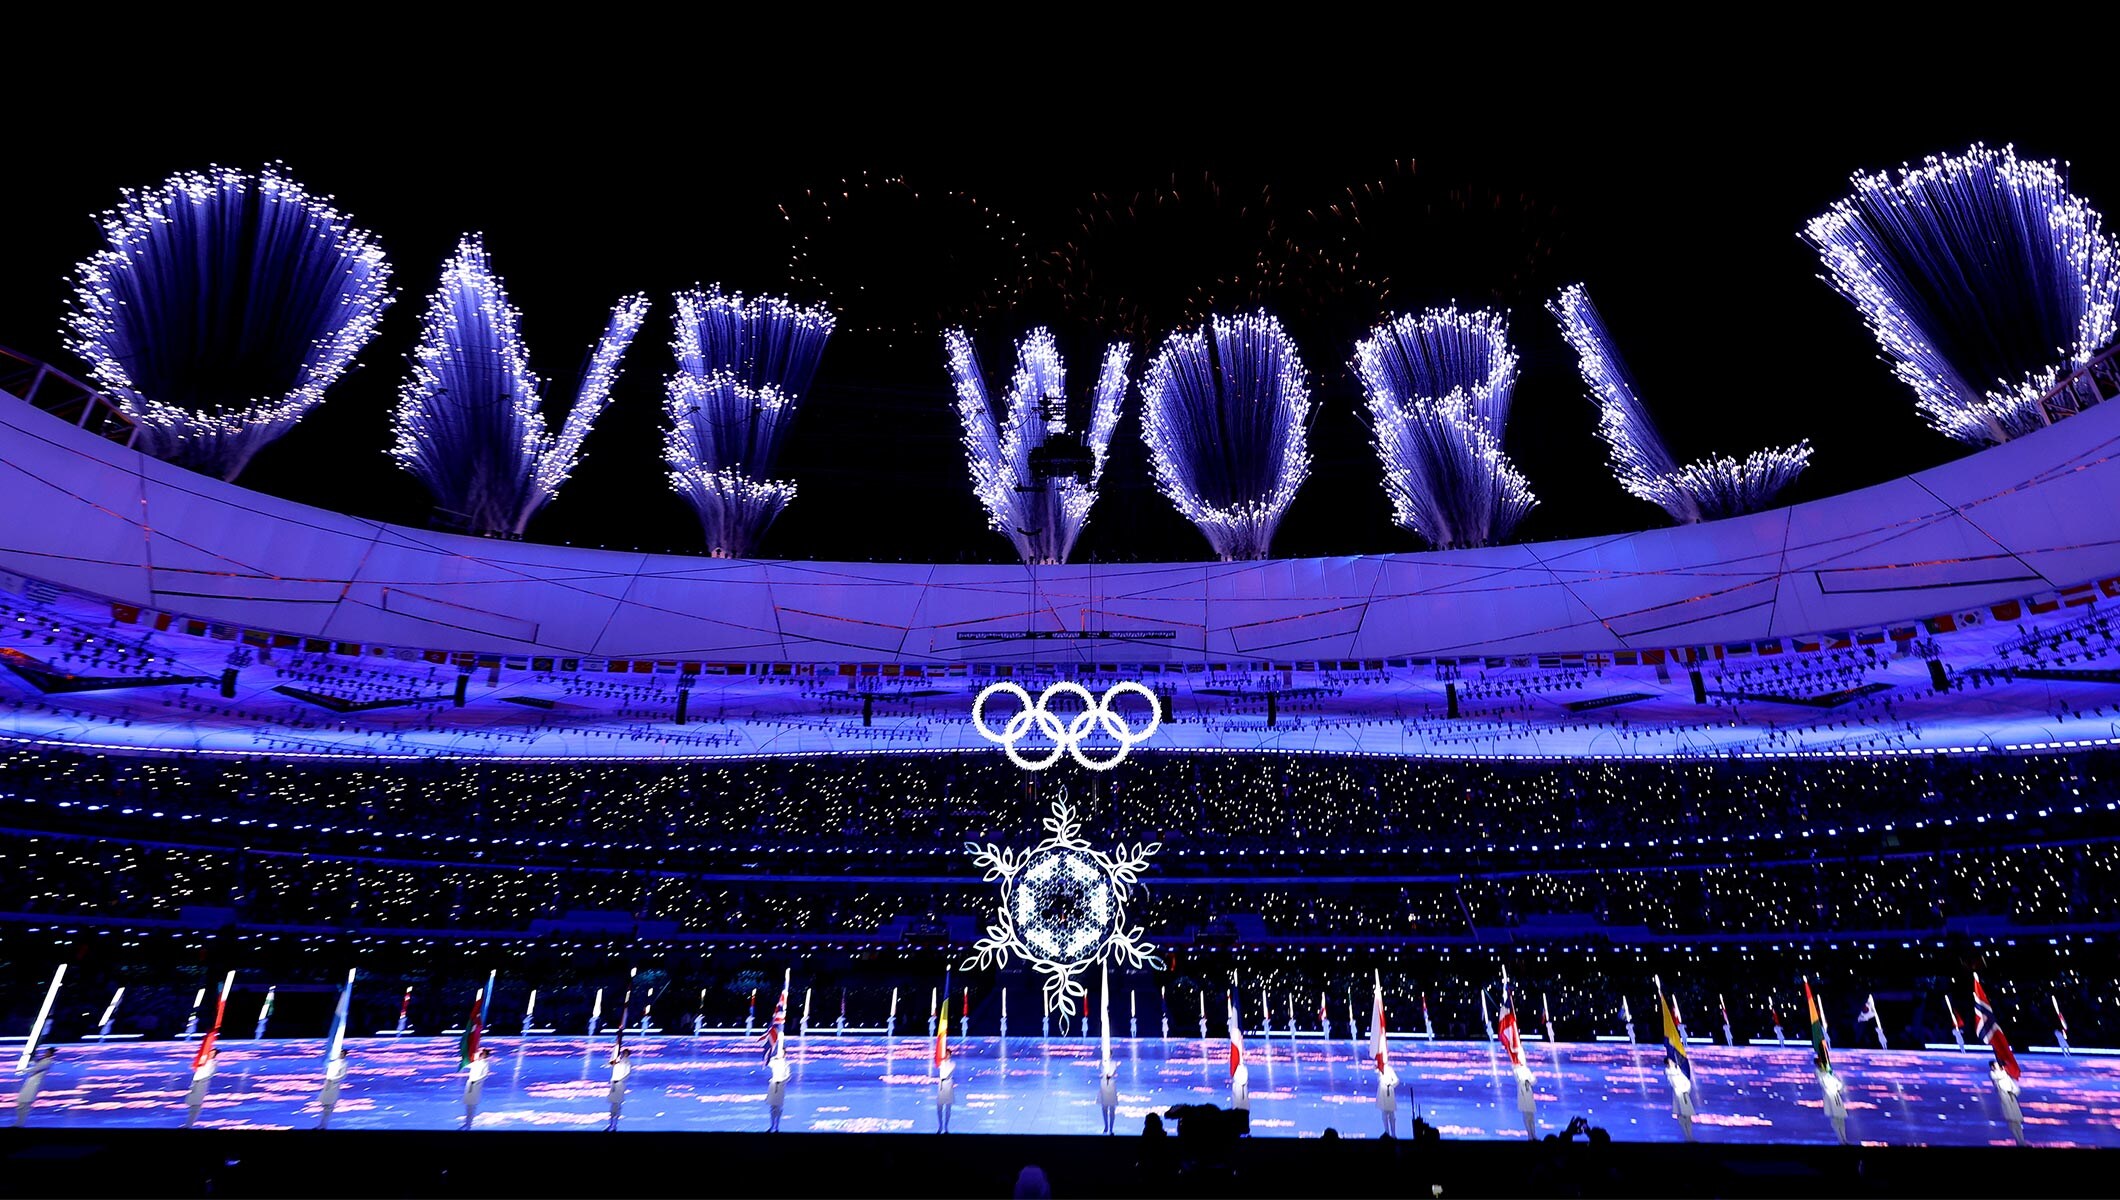 A firework display is seen inside the stadium alongside the Olympic rings during the Beijing 2022 Olympic Winter Games Closing Ceremony